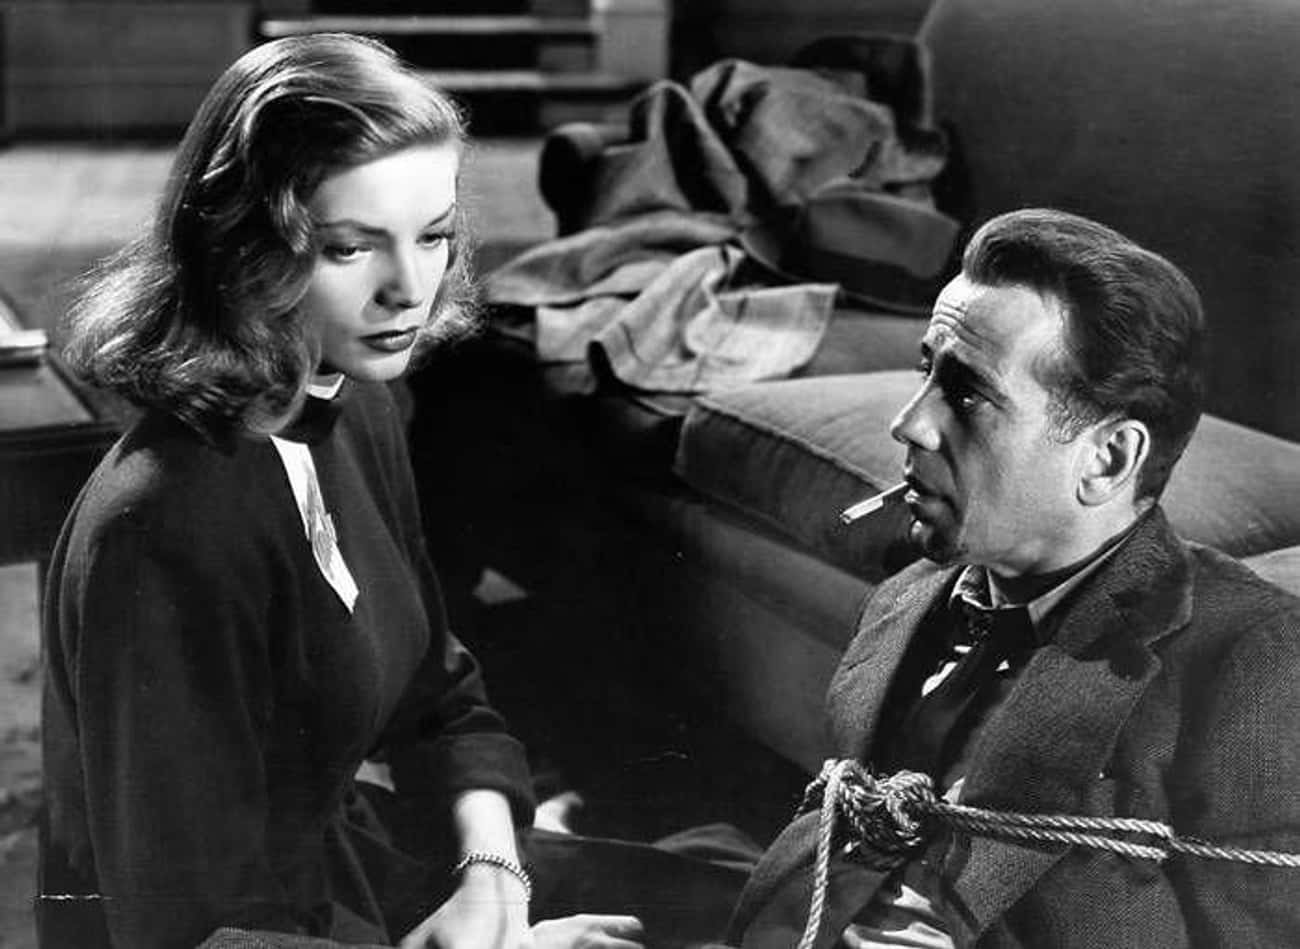 The Film Was (Loosely) Inspired By The Detective Story 'The Big Sleep'